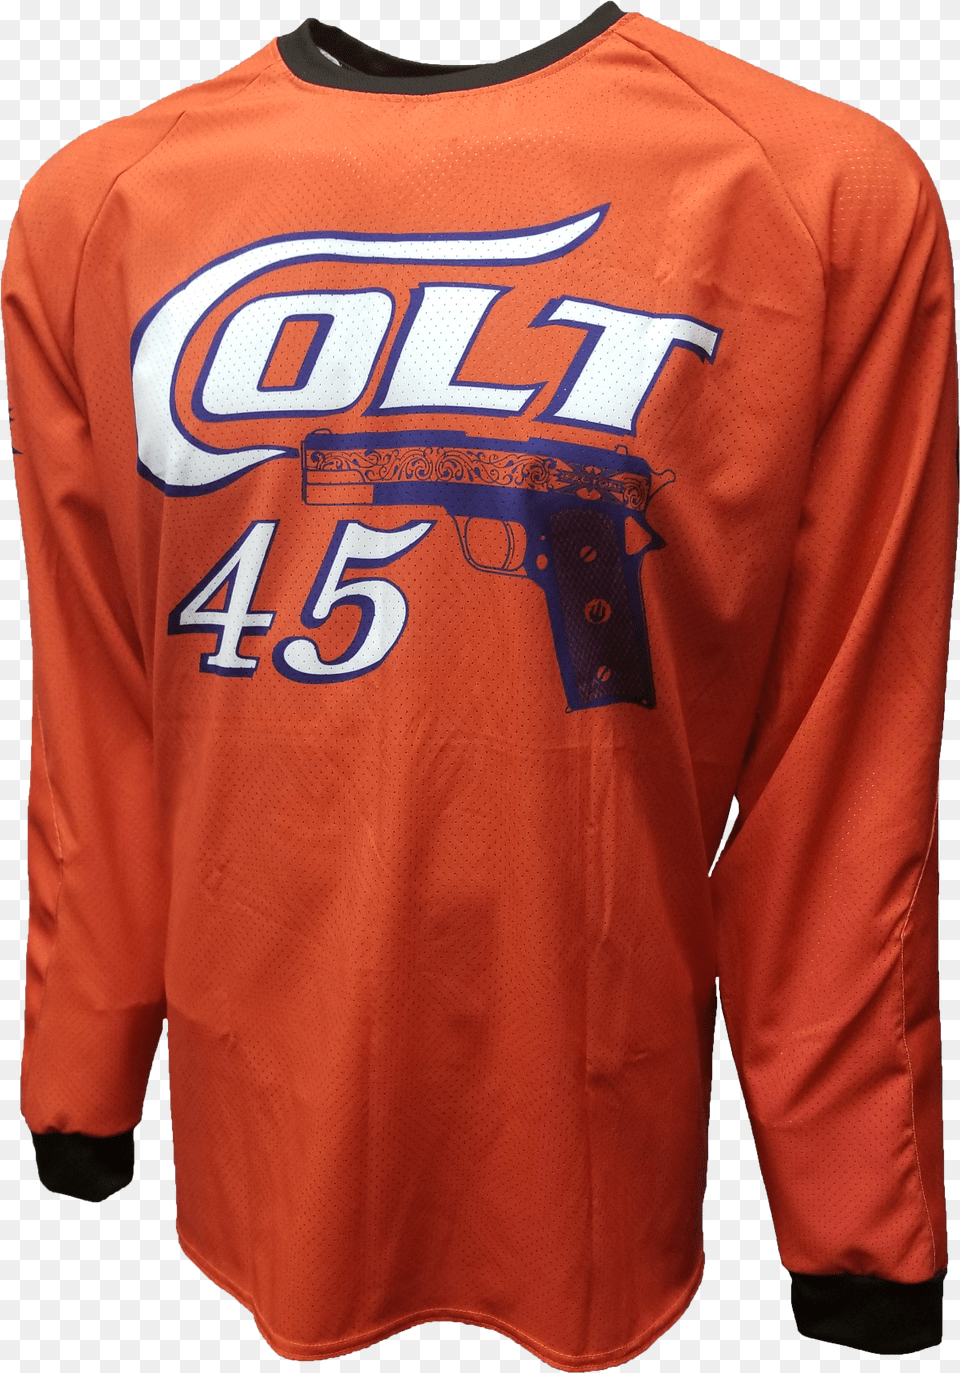 Colt 45 Sprnt Jersey Long Sleeved T Shirt Free Png